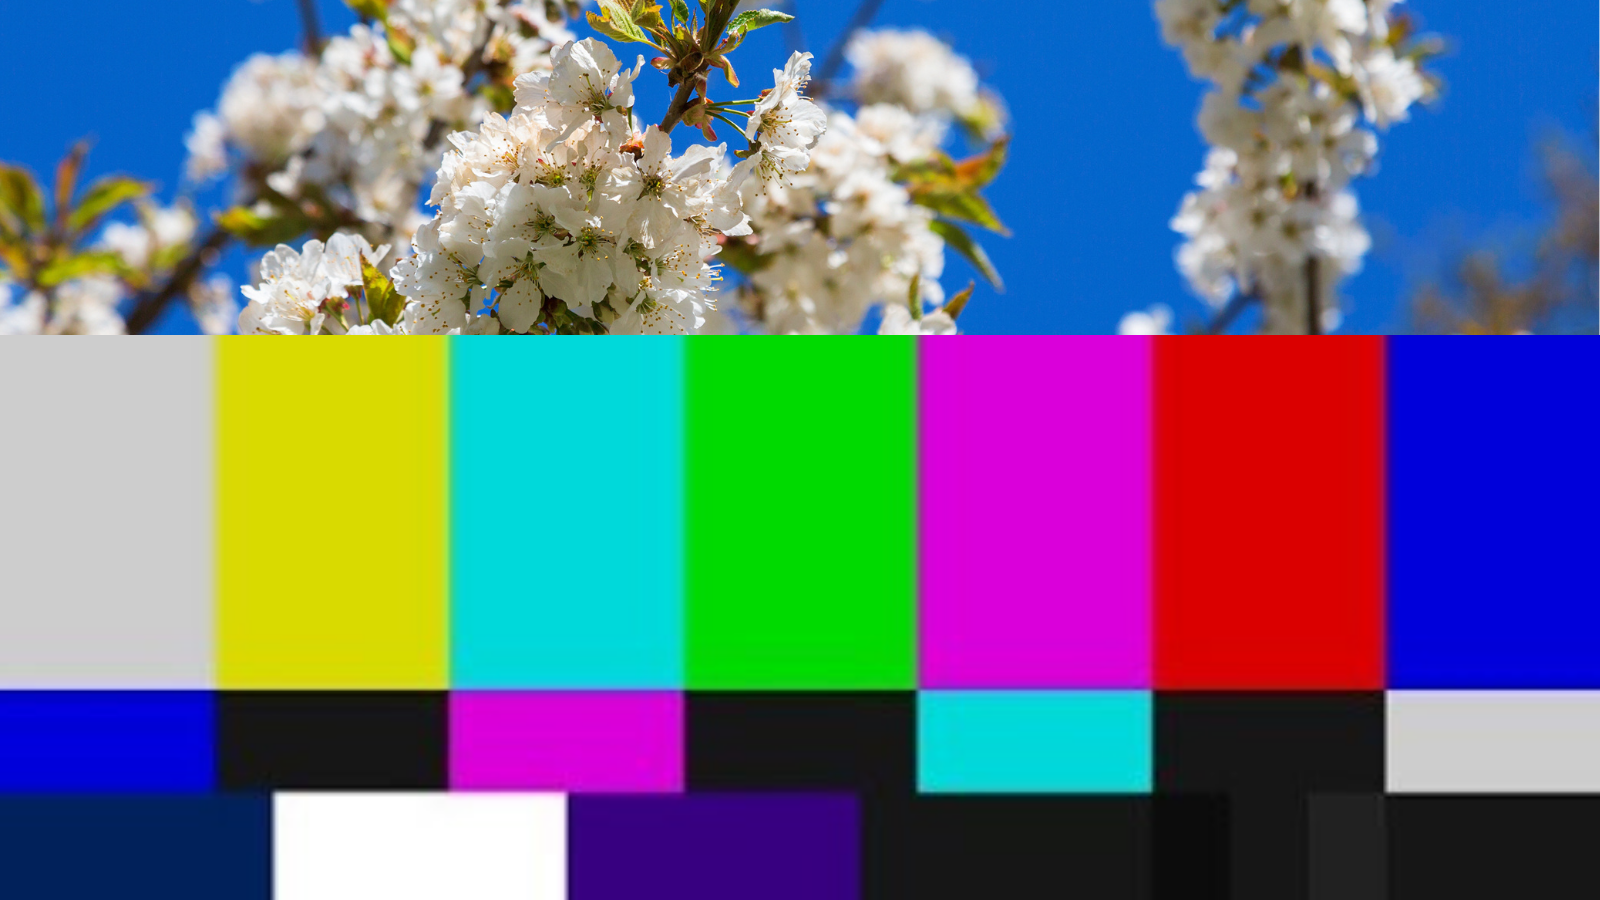 This collage image includes white flowers against a blue sky in the top 1/3, and a SMPTE color bars test pattern used to test television signals.